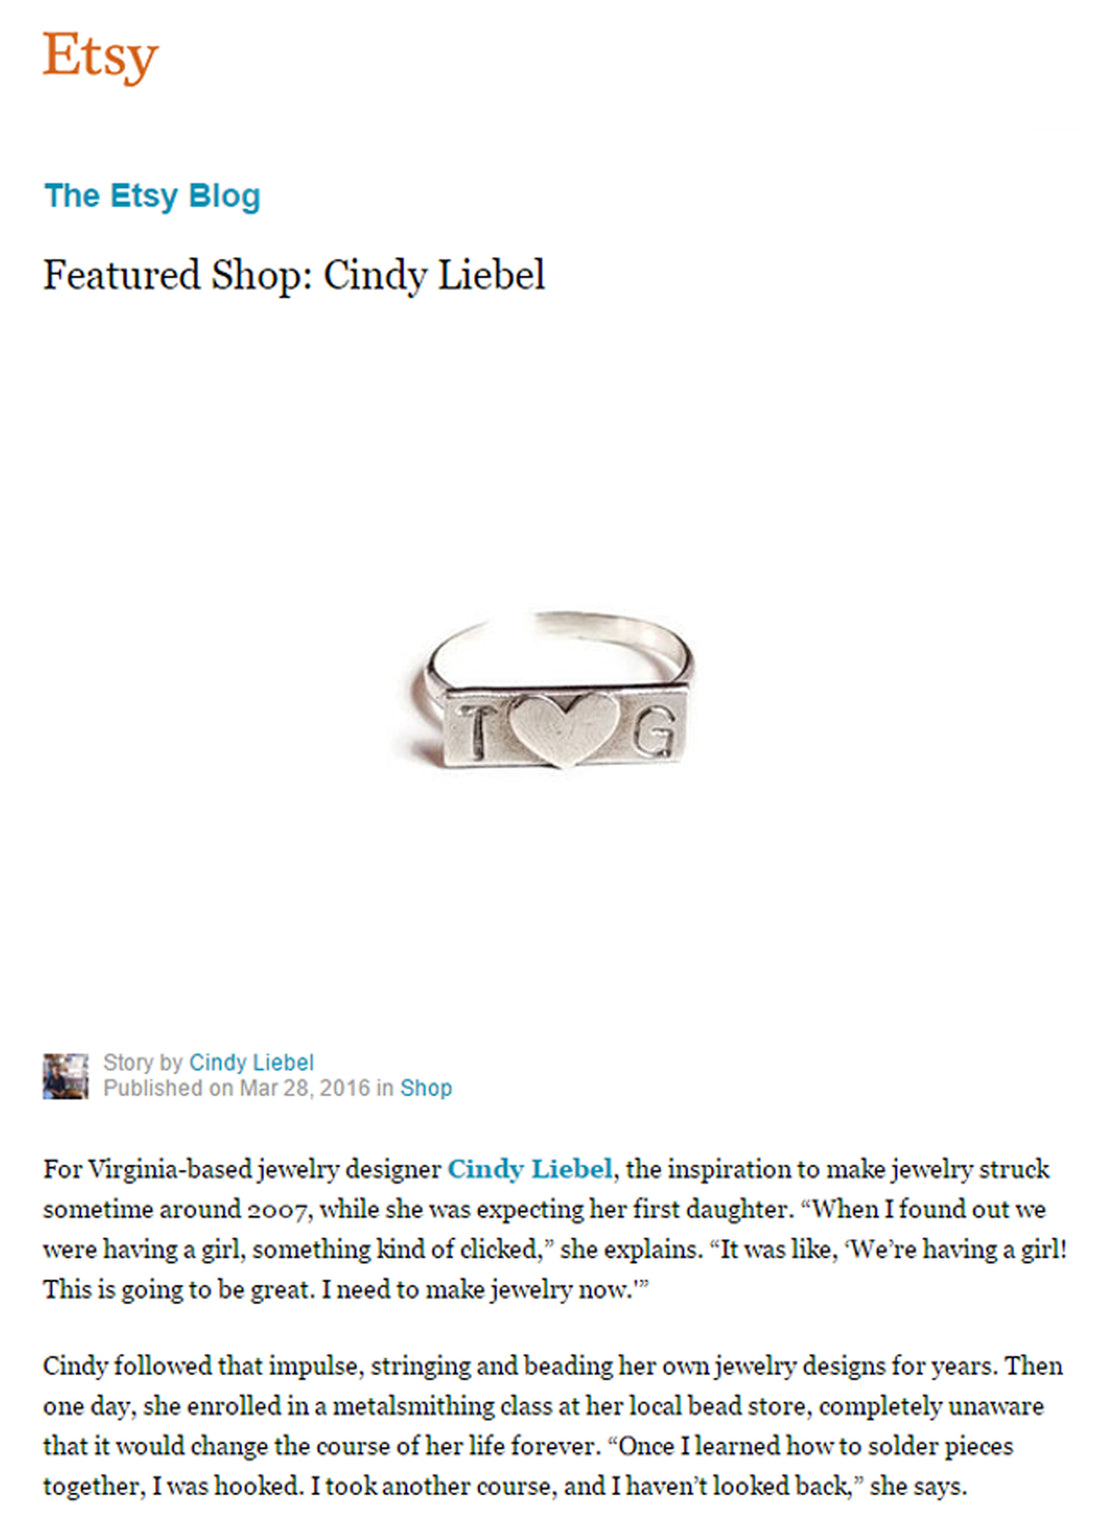 Cindy Liebel Featured Shop on Etsy